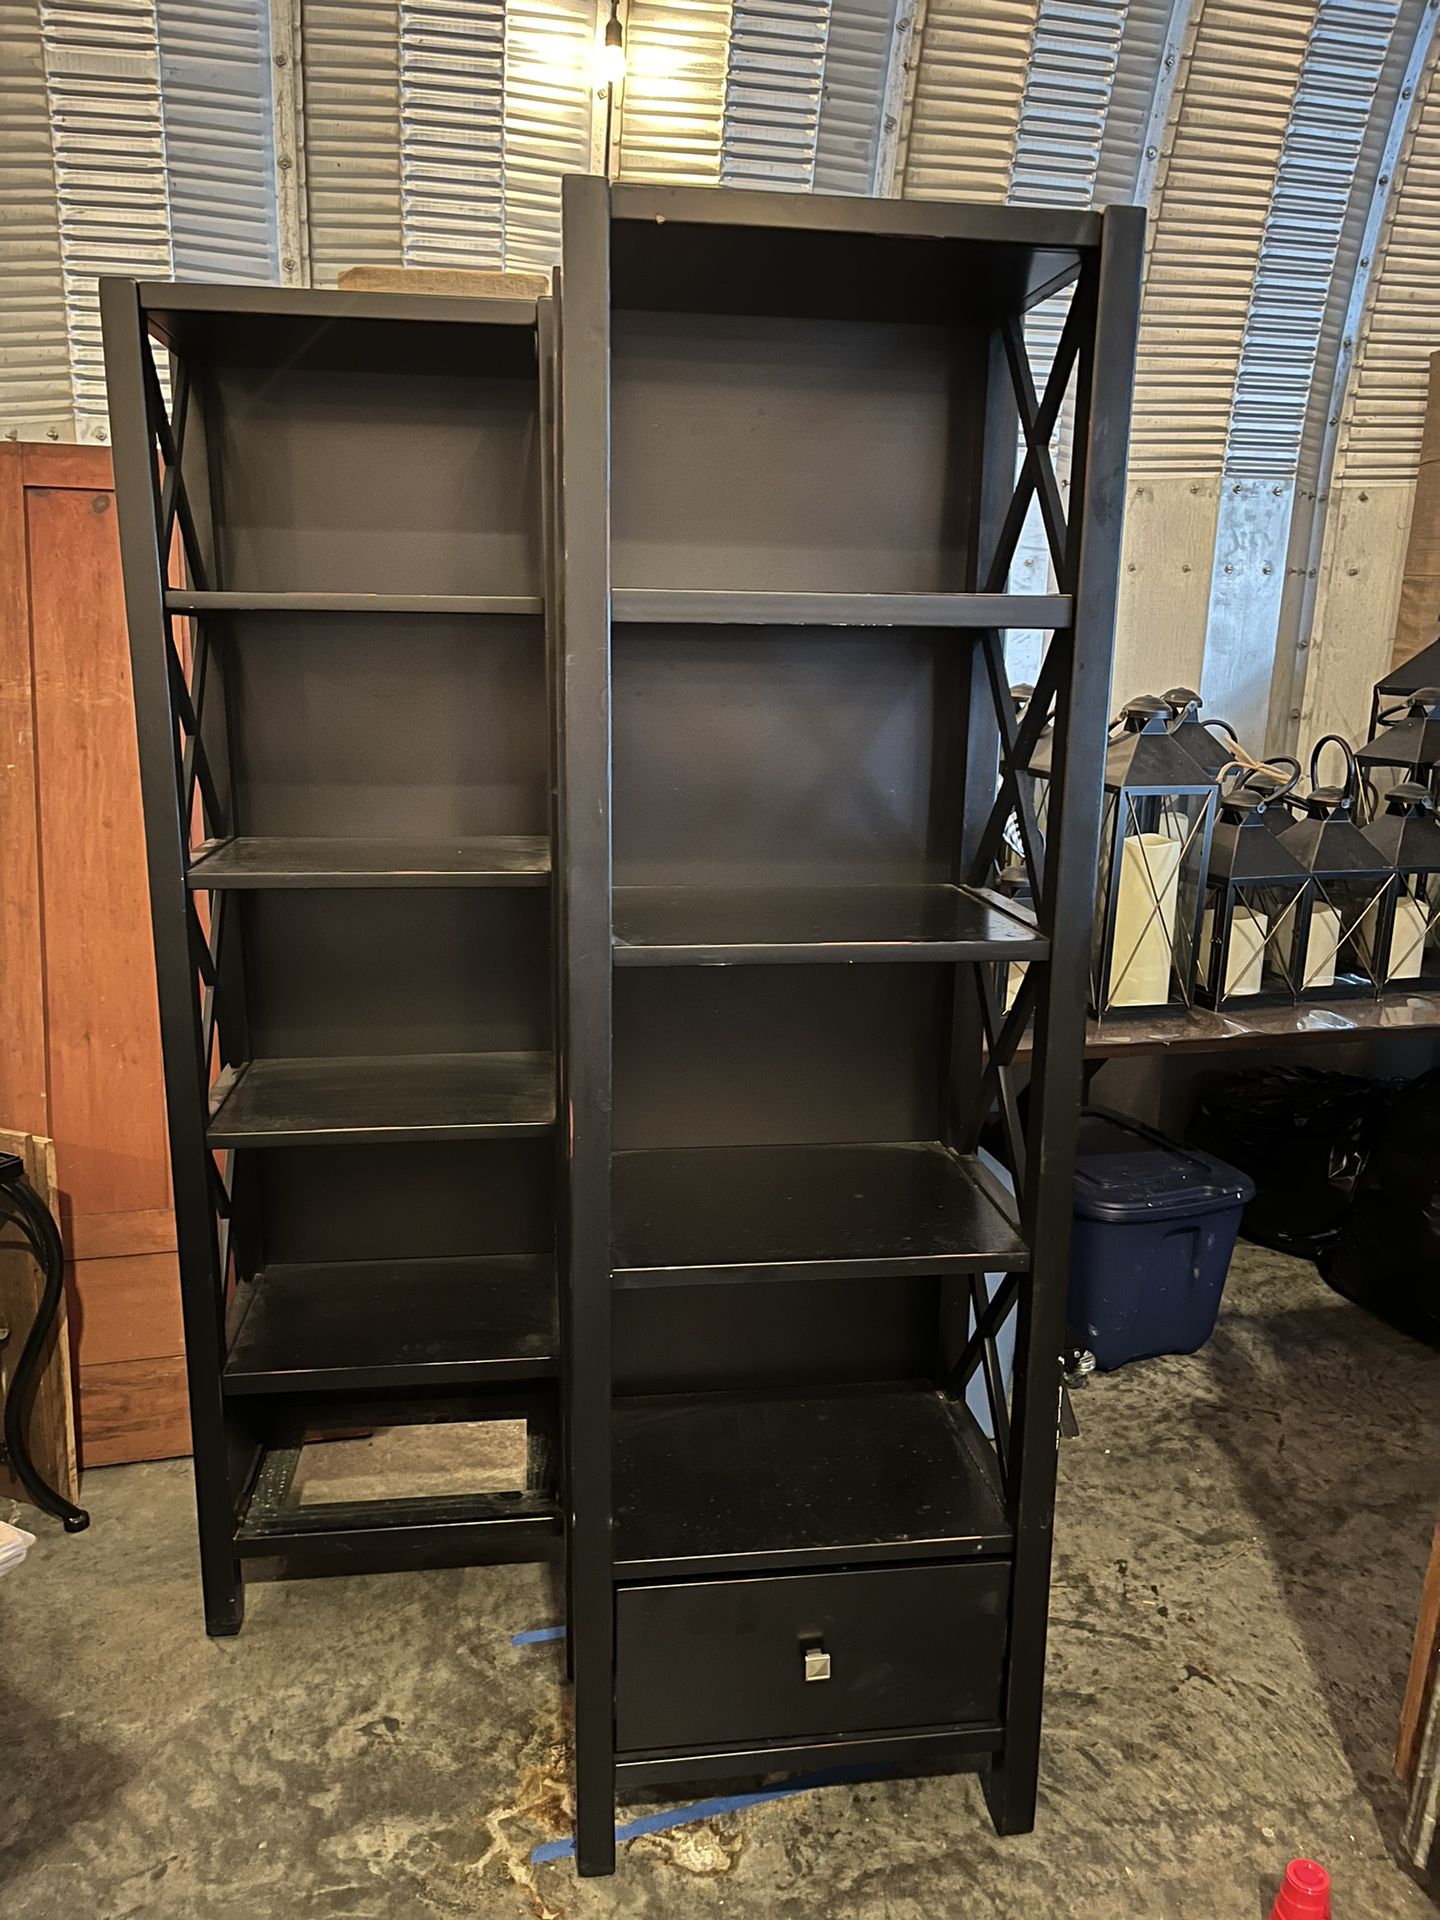 3 Pc Bookshelves With Hanging File Drawer